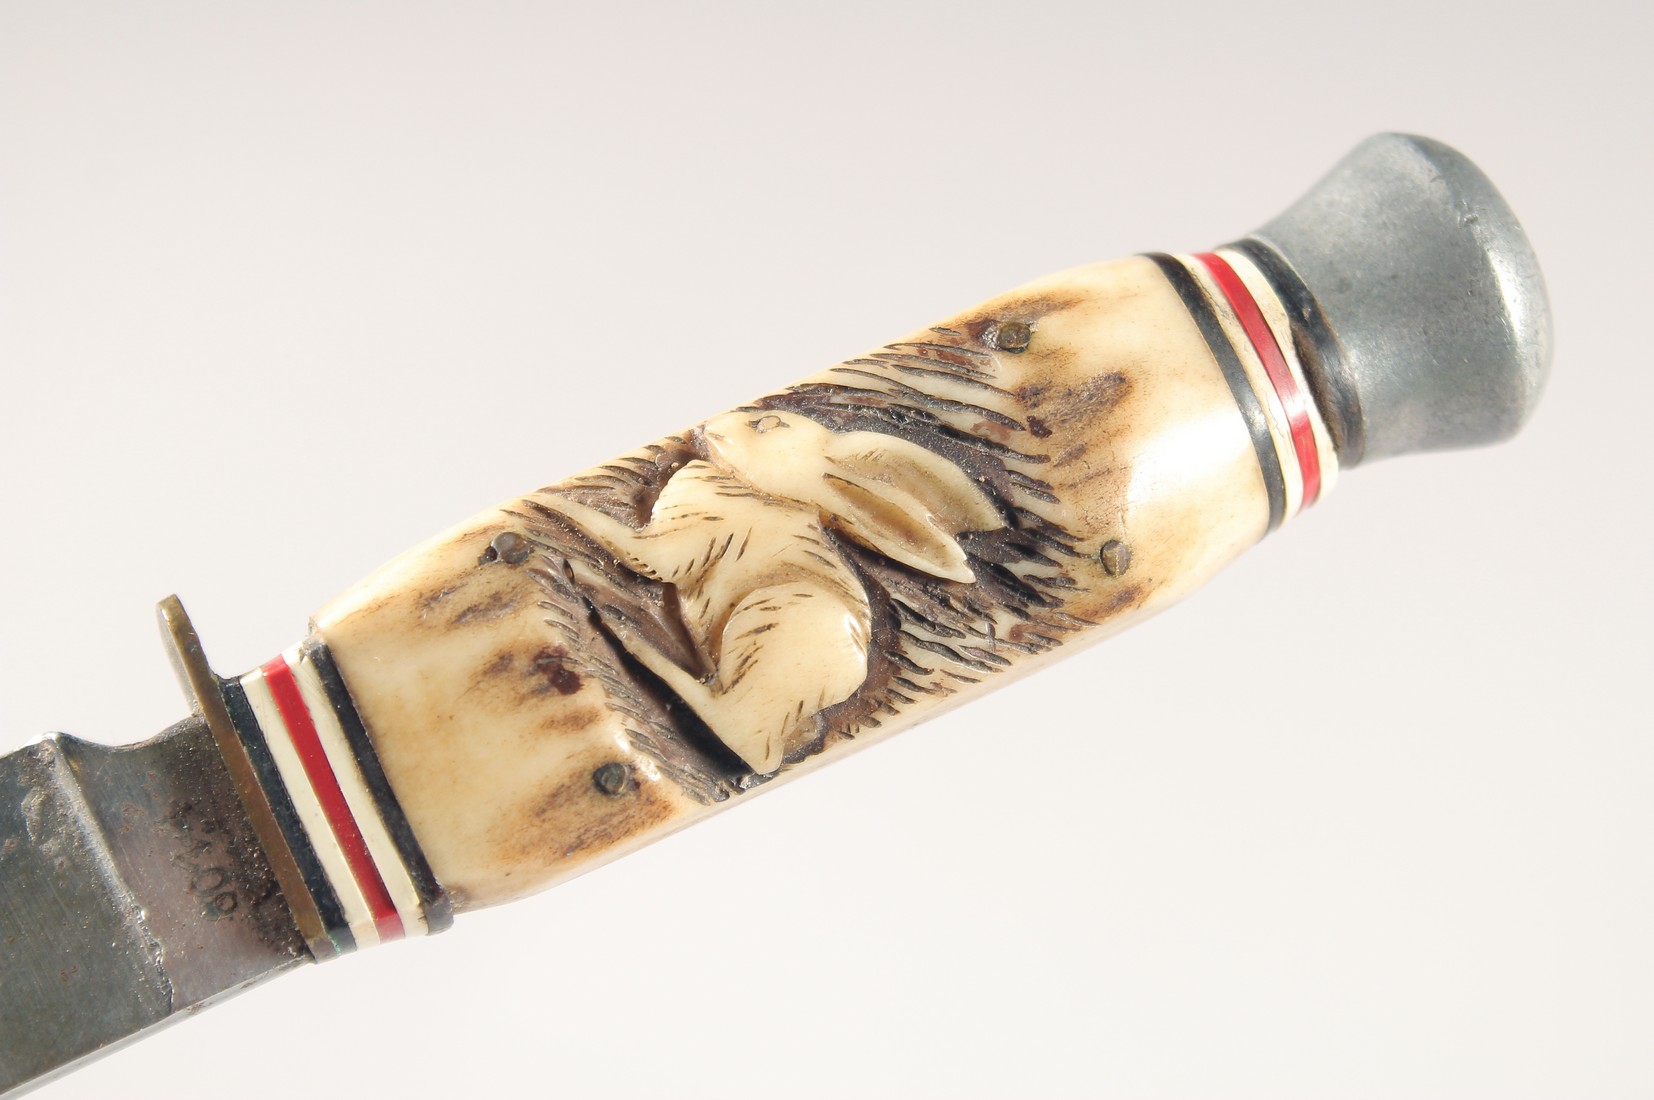 A KINFE, with antler handle carved with a rabbit, REFWAPPEN SOLINGEN, 7.5" long, in a leather - Image 4 of 5